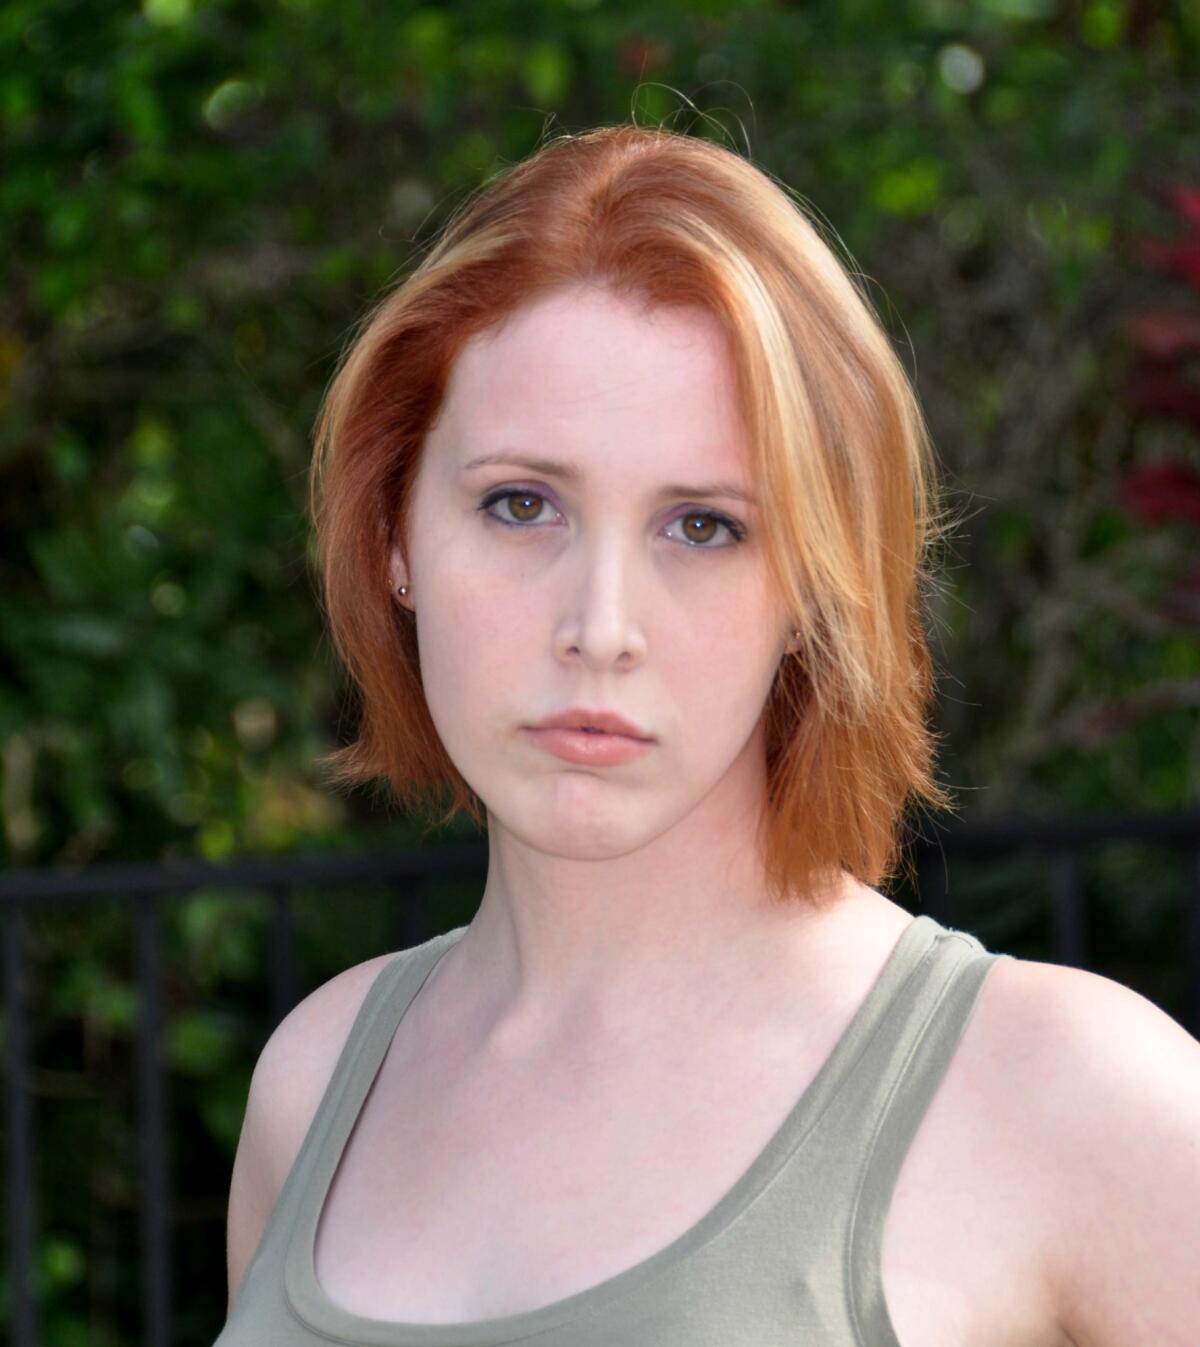 This undated image released by Frances Silver shows Dylan Farrow, daughter of Woody Allen and Mia Farrow. Dylan Farrow's open letter in the New York Times detailed alleged sexual abuse by Allen in 1993. Allen was never charged with a crime.